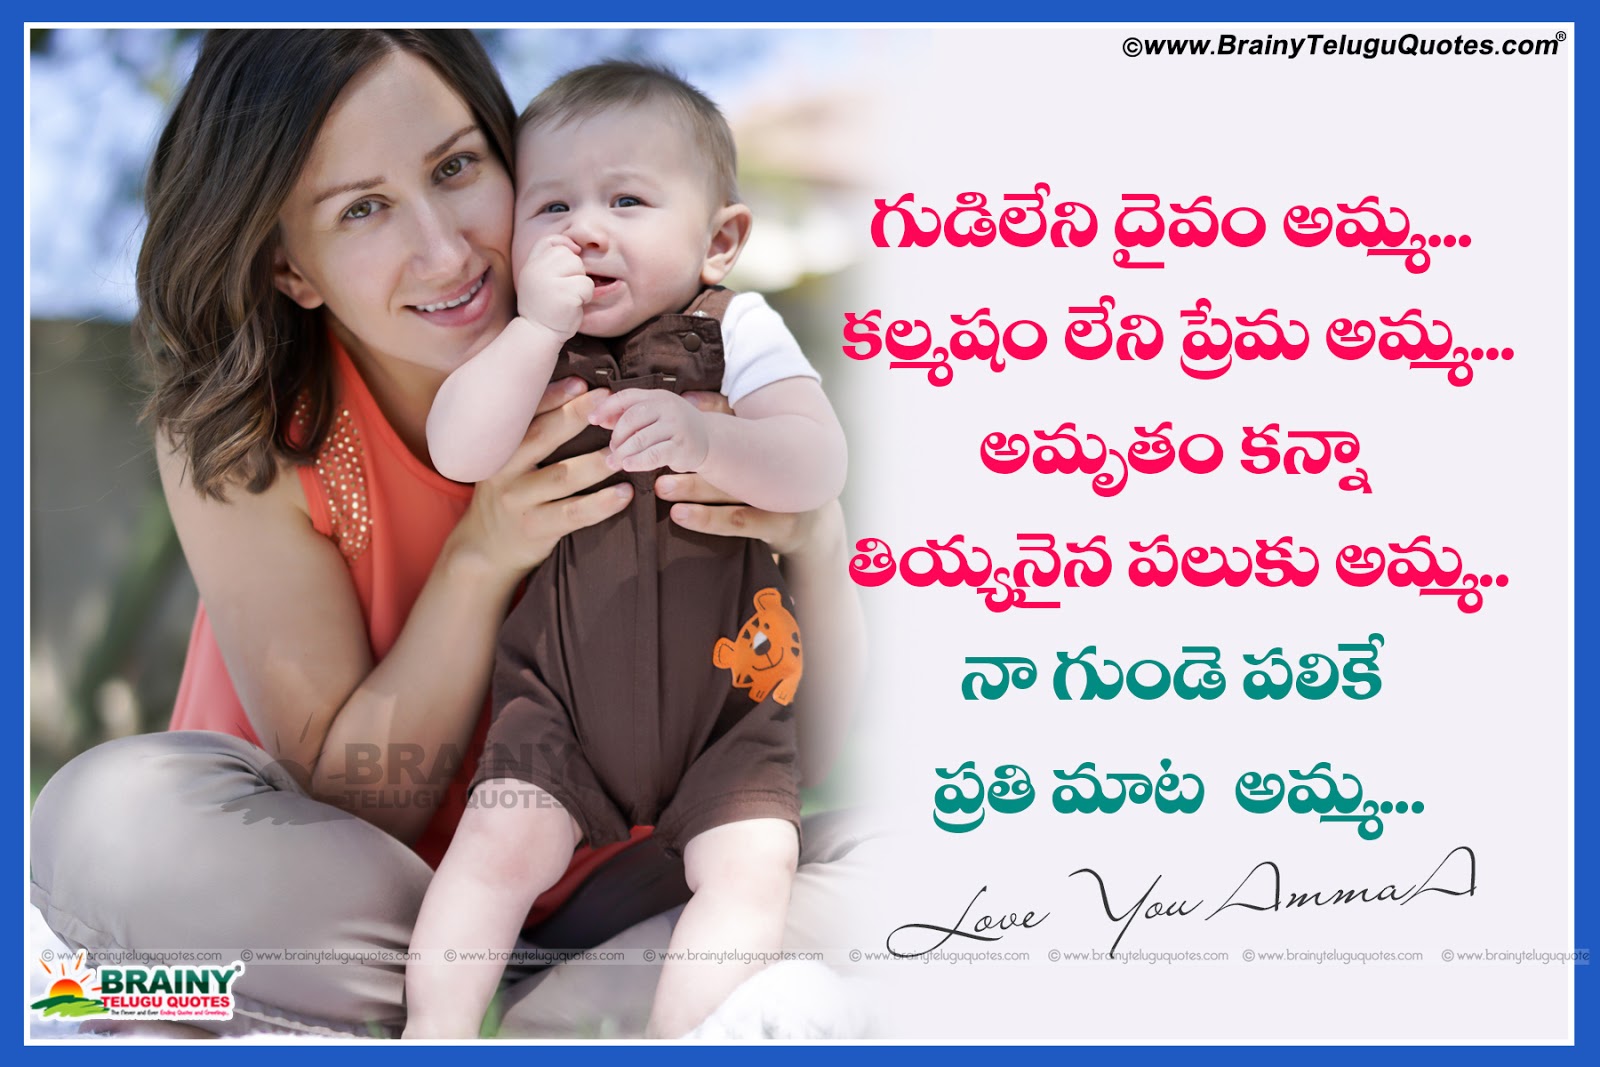 My mother best friend. Открытка для день матери in Telugu. About mother. Love your mother not girls quotation.